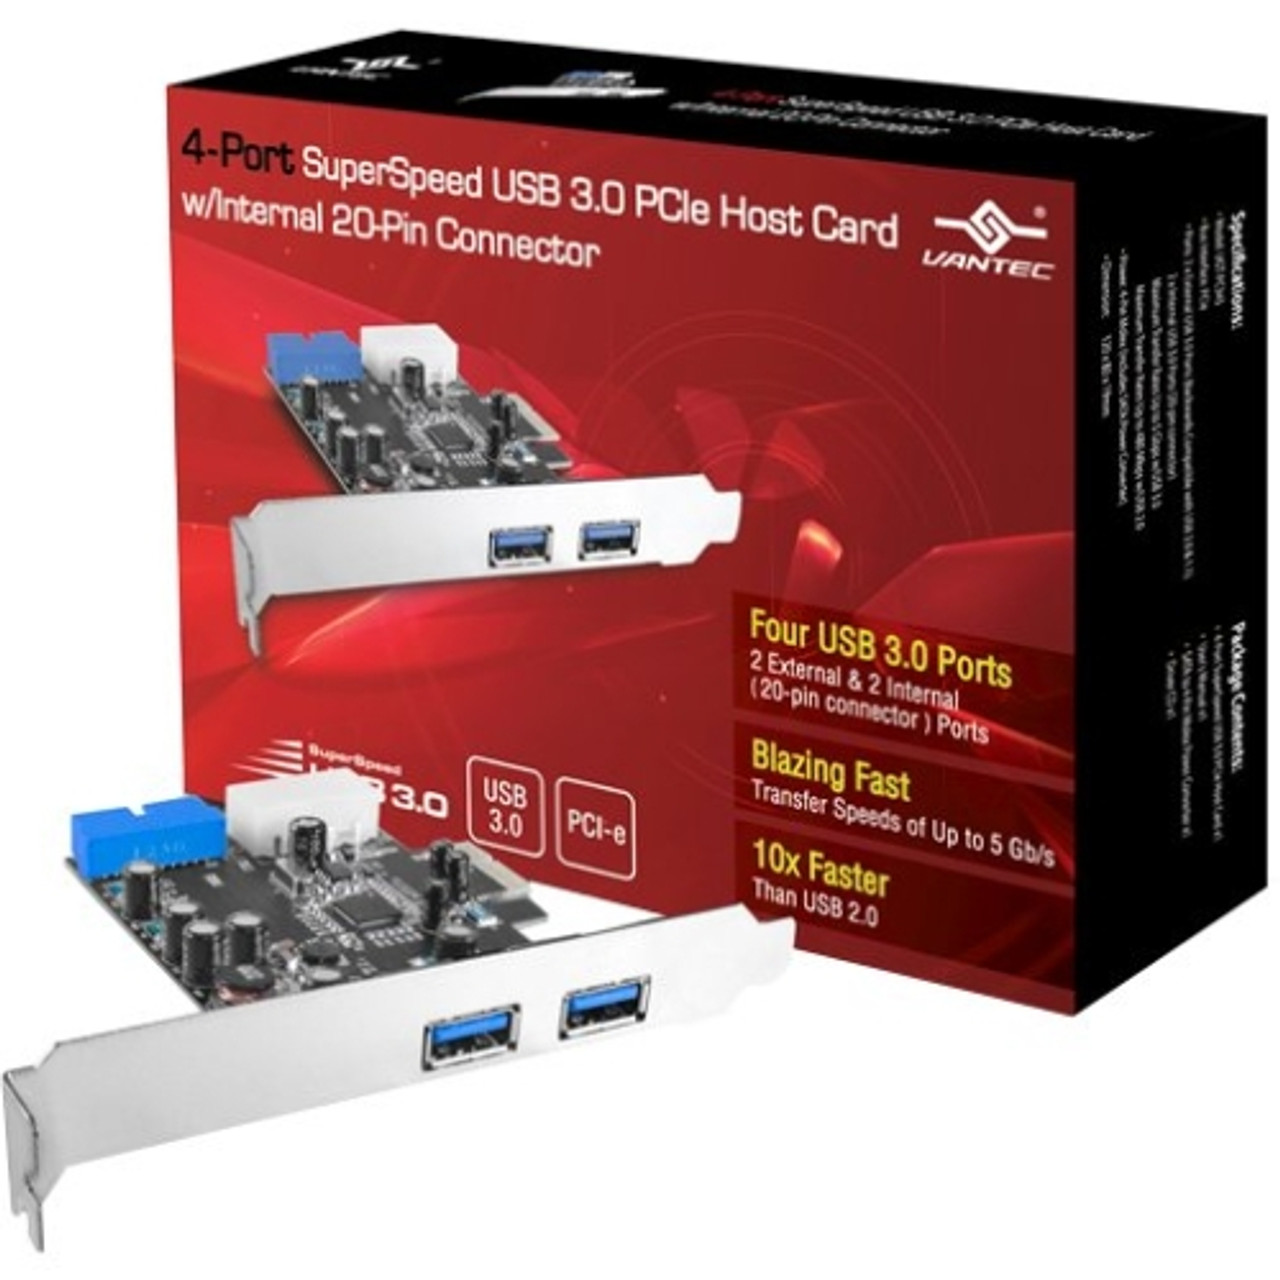 UGT-PC345 Vantec 4-Port SuperSpeed USB 3.0 PCIe Host Card w/ Internal 20-Pin Connector